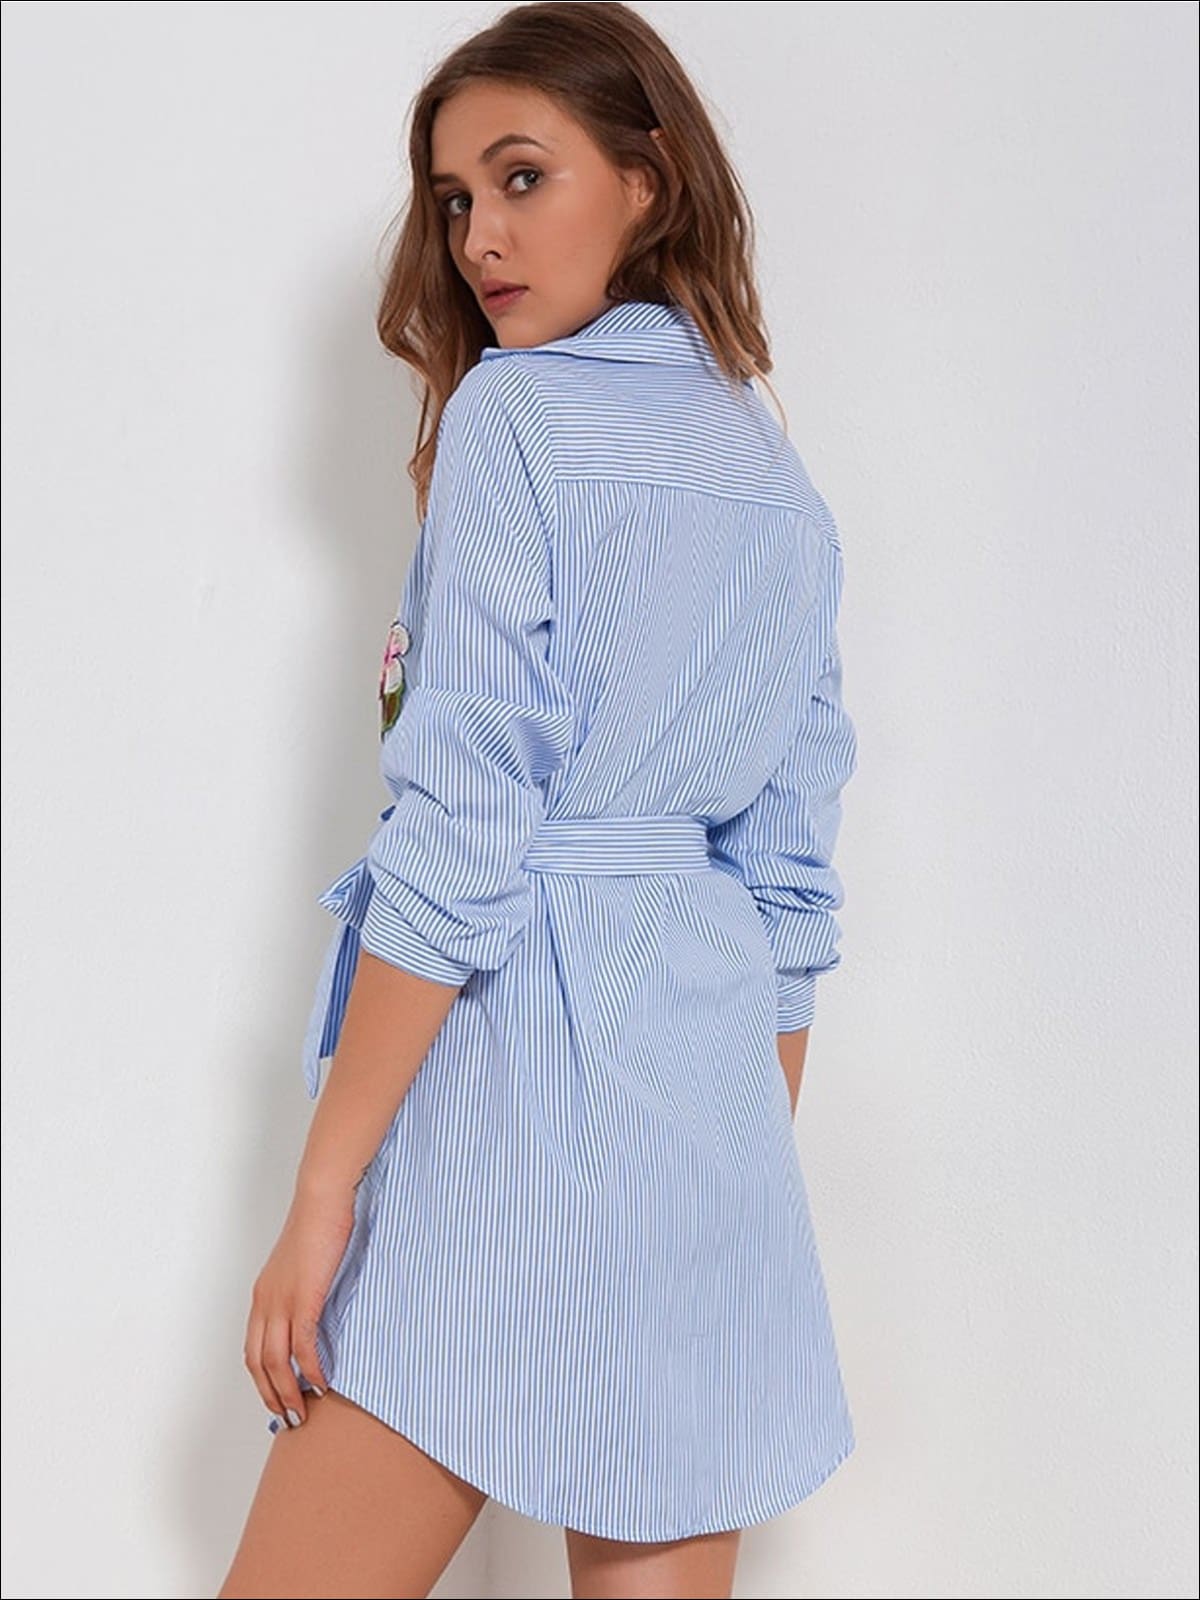 Women's Striped Floral Embroidered Belted Shirt Dress